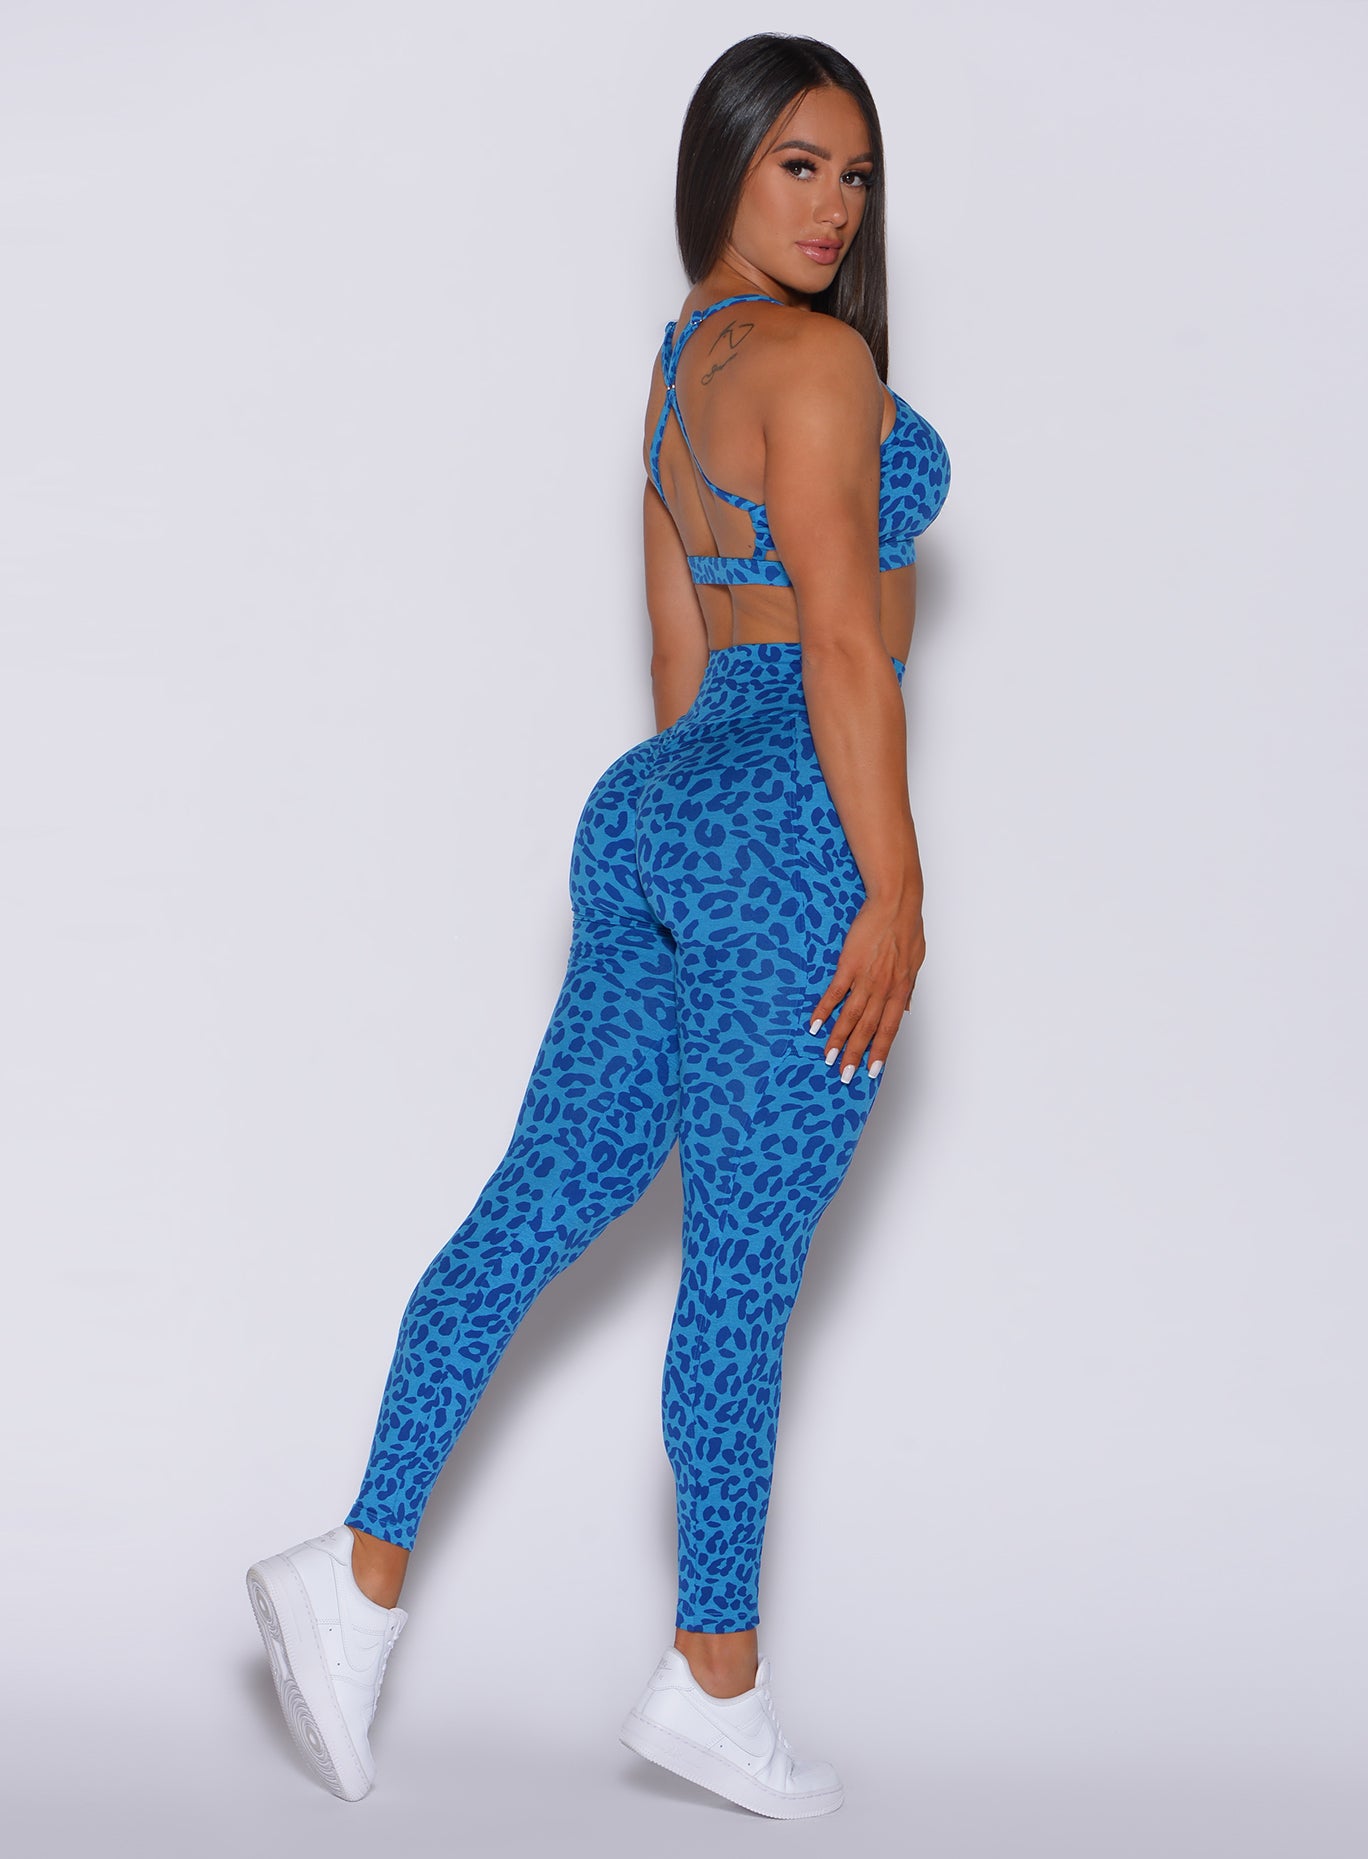 Right side profile view of a model in our curves leggings in blue cheetah color and a matching bra